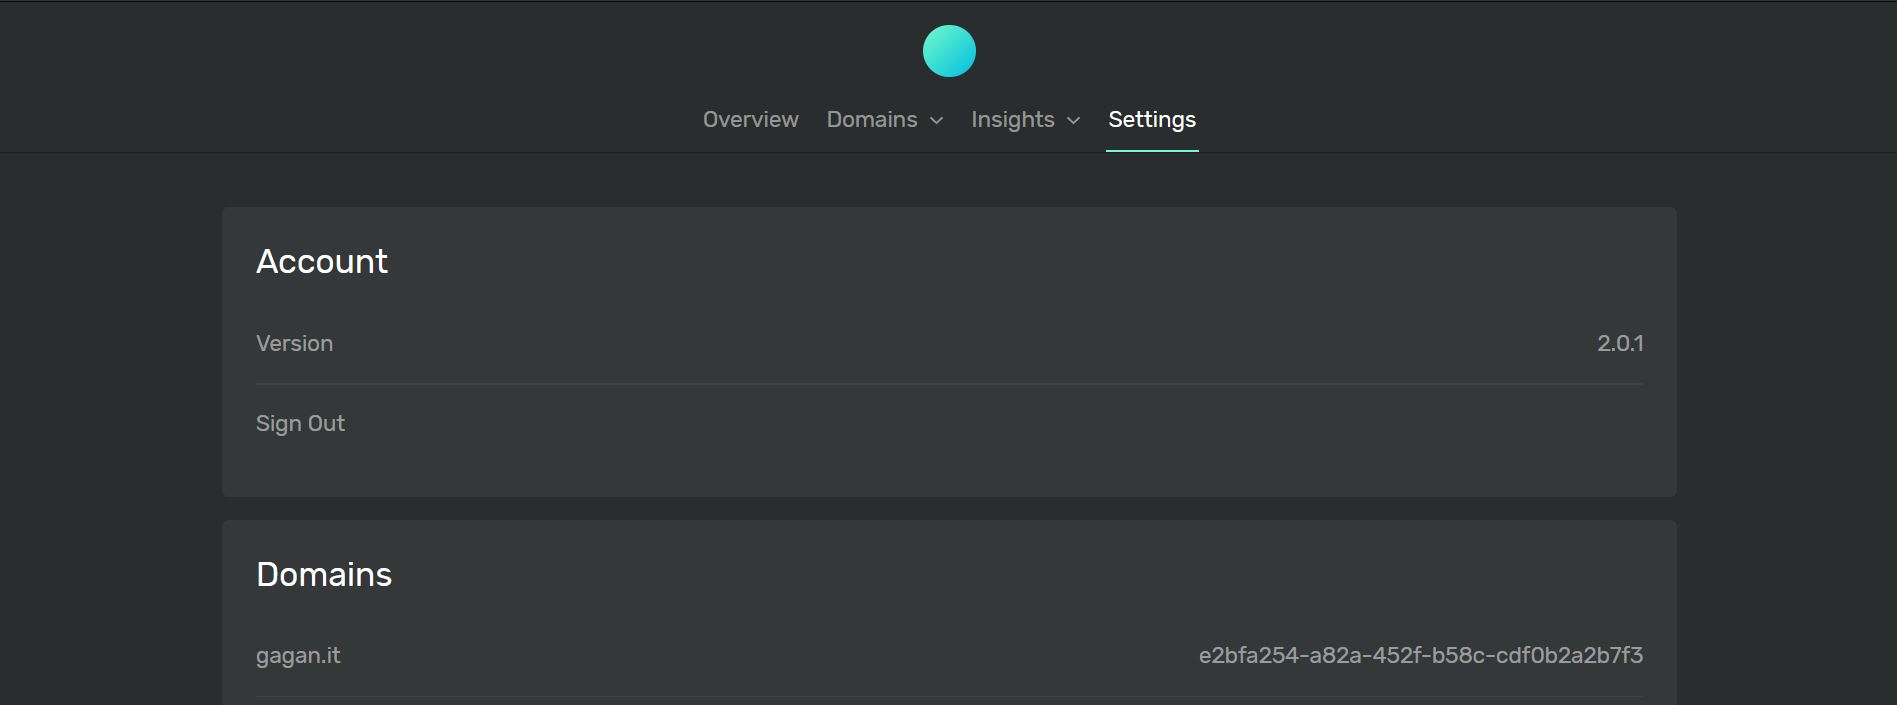 Domain setting in ackee server